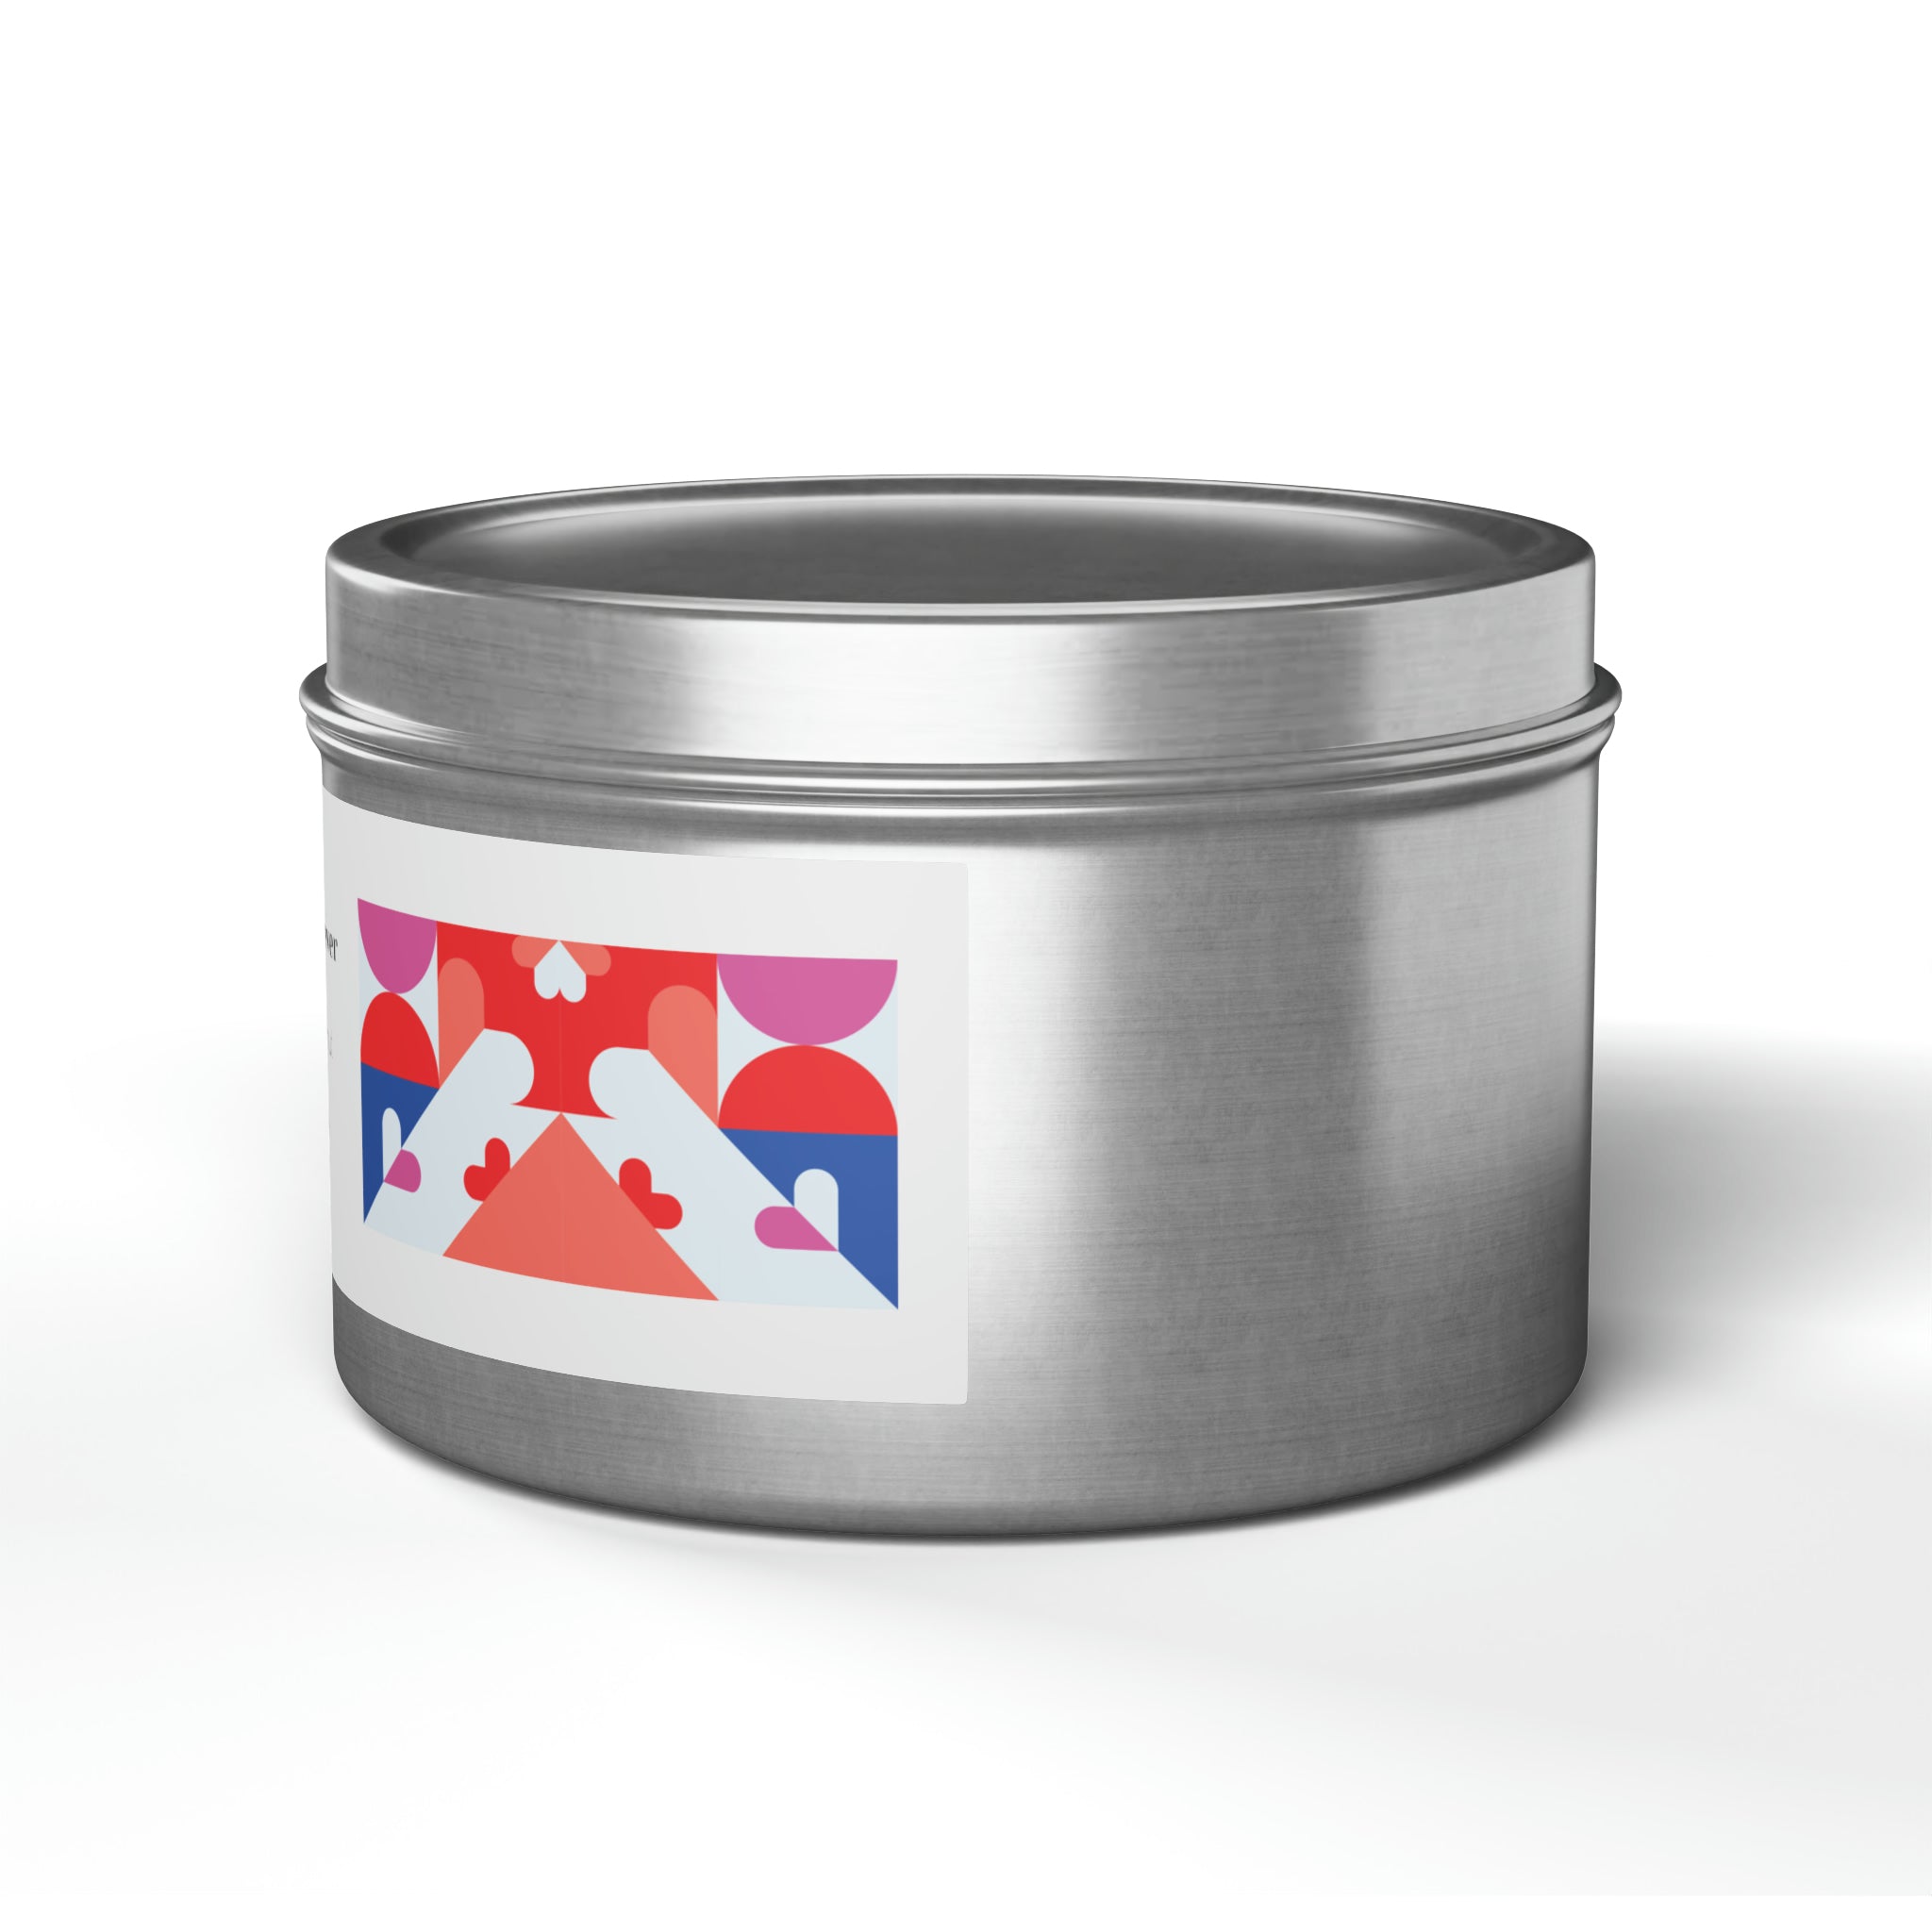 Mango coconut Always & Forever Soy base candle love, valentine's day gift Tin Candles-46